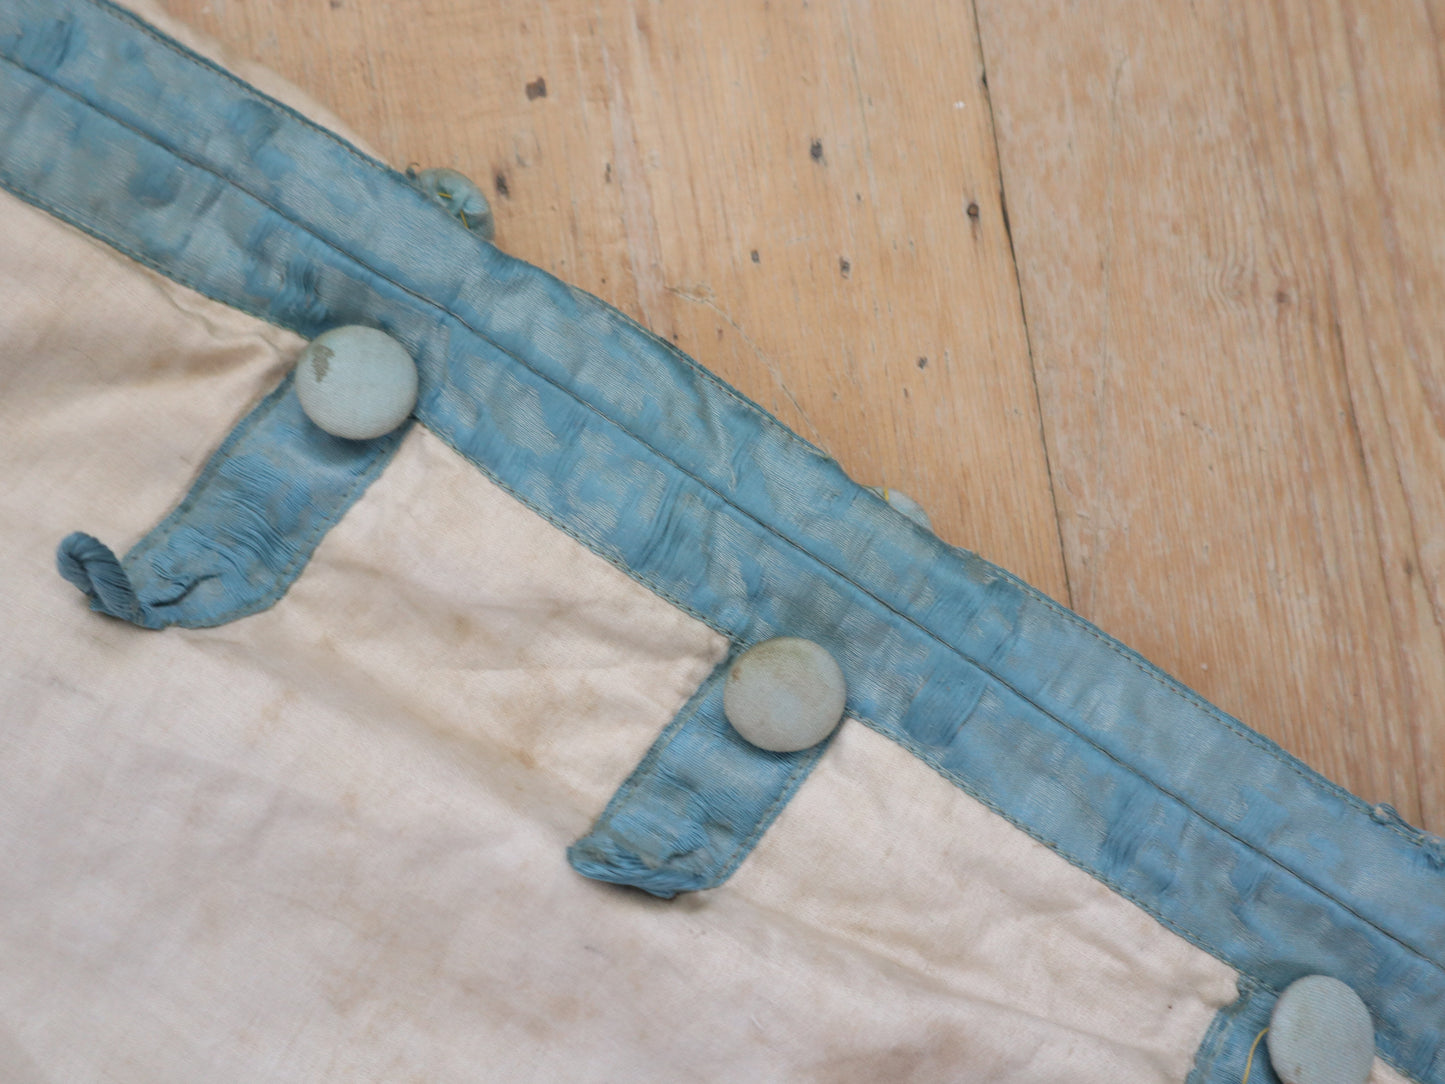 Antique French Theatre Costume Trousers Breeches Pants 18th Century Style White Blue Cotton Silk Opera